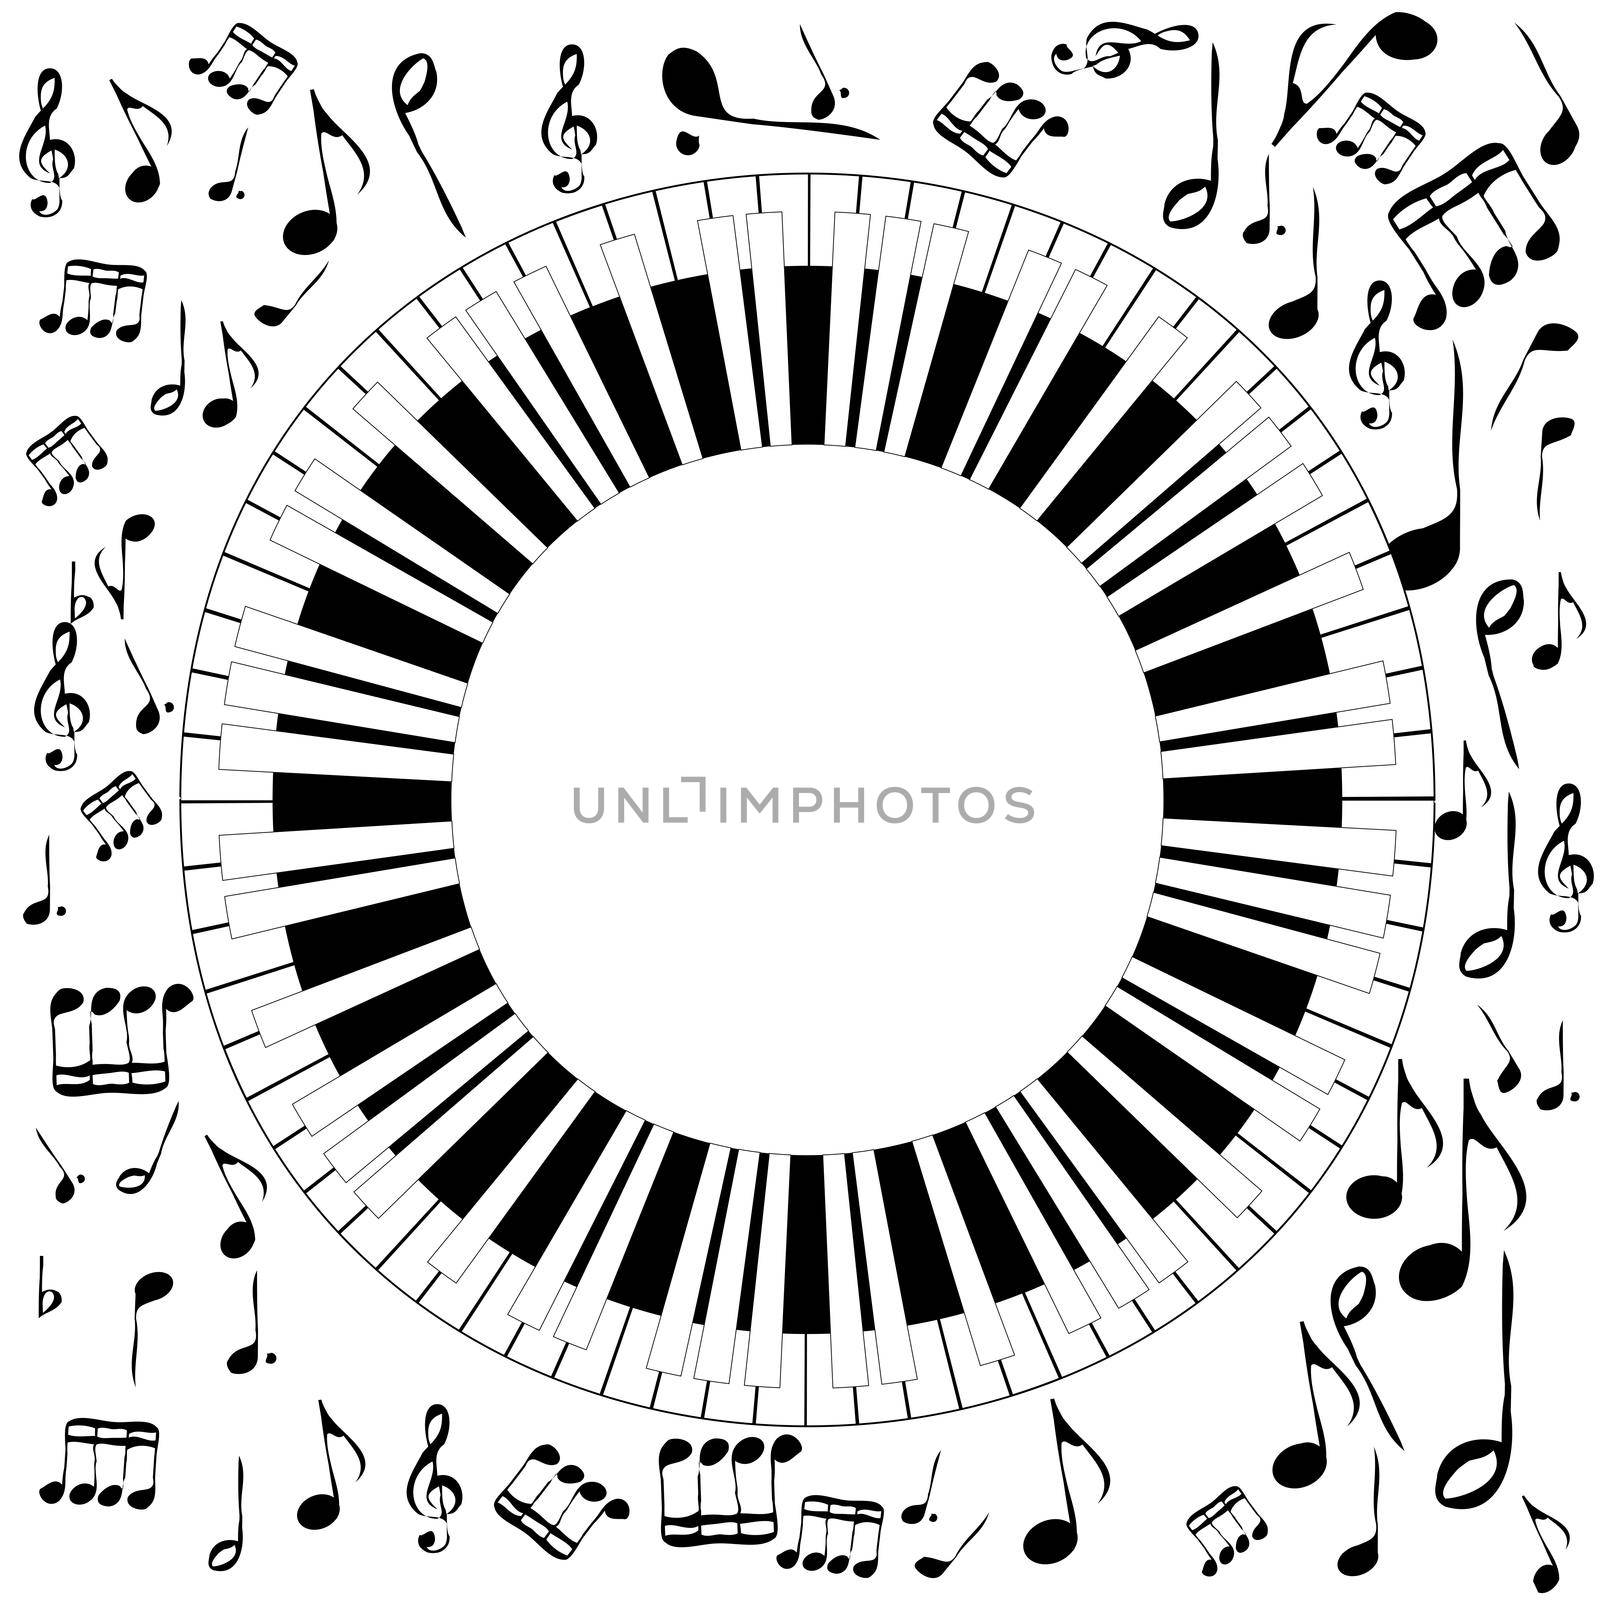 Black and white musical concept with round piano and musical notes and symbols